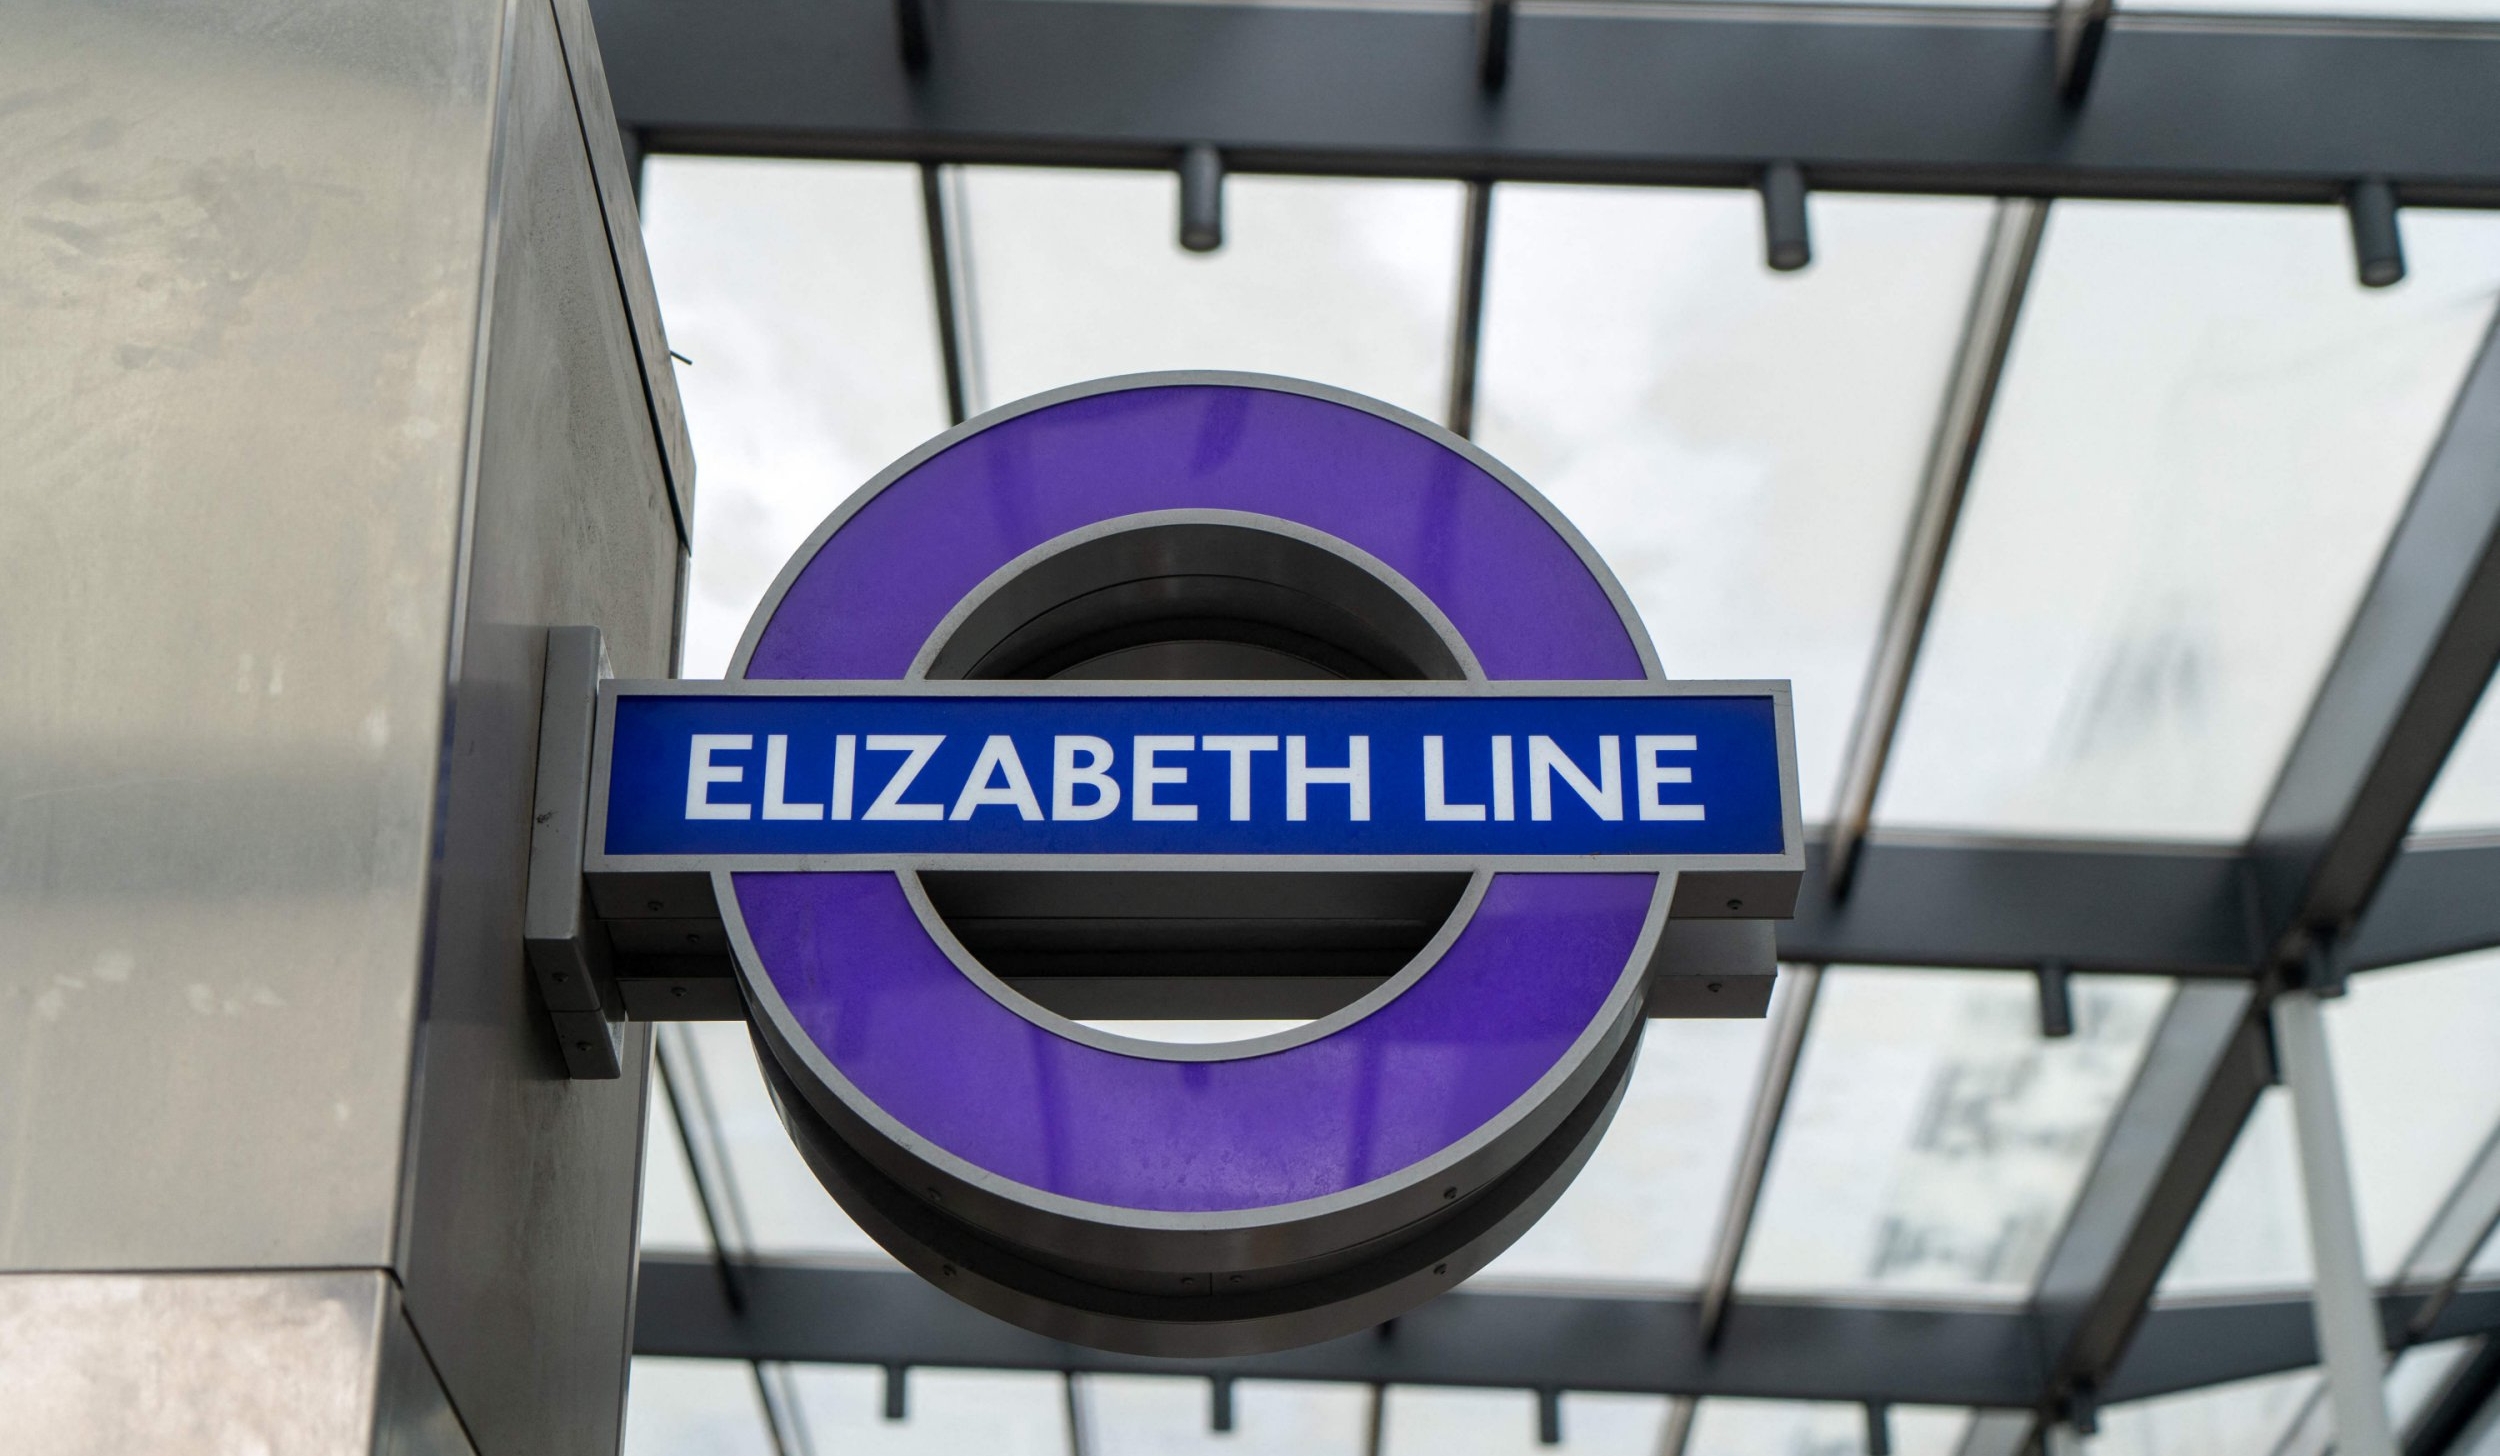 Signs for Transport for London's new Elizabeth Line are pictured at Paddington Station in London on March 13, 2022, before a test run of a train between Paddington station and Woolwich station and back. - The Elizabeth Line, named after Britain's reigning monarch Queen Elizabeth II, has been decades in the planning and making and seeks to add 10 percent to central London's creaking rail capacity. Once opened, Crossrail will run from Reading and Heathrow in the west to Shenfield and Abbey Wood in the east, via 13 miles of new tunnels in central London. (Photo by Niklas HALLE'N / AFP) (Photo by NIKLAS HALLE'N/AFP via Getty Images)